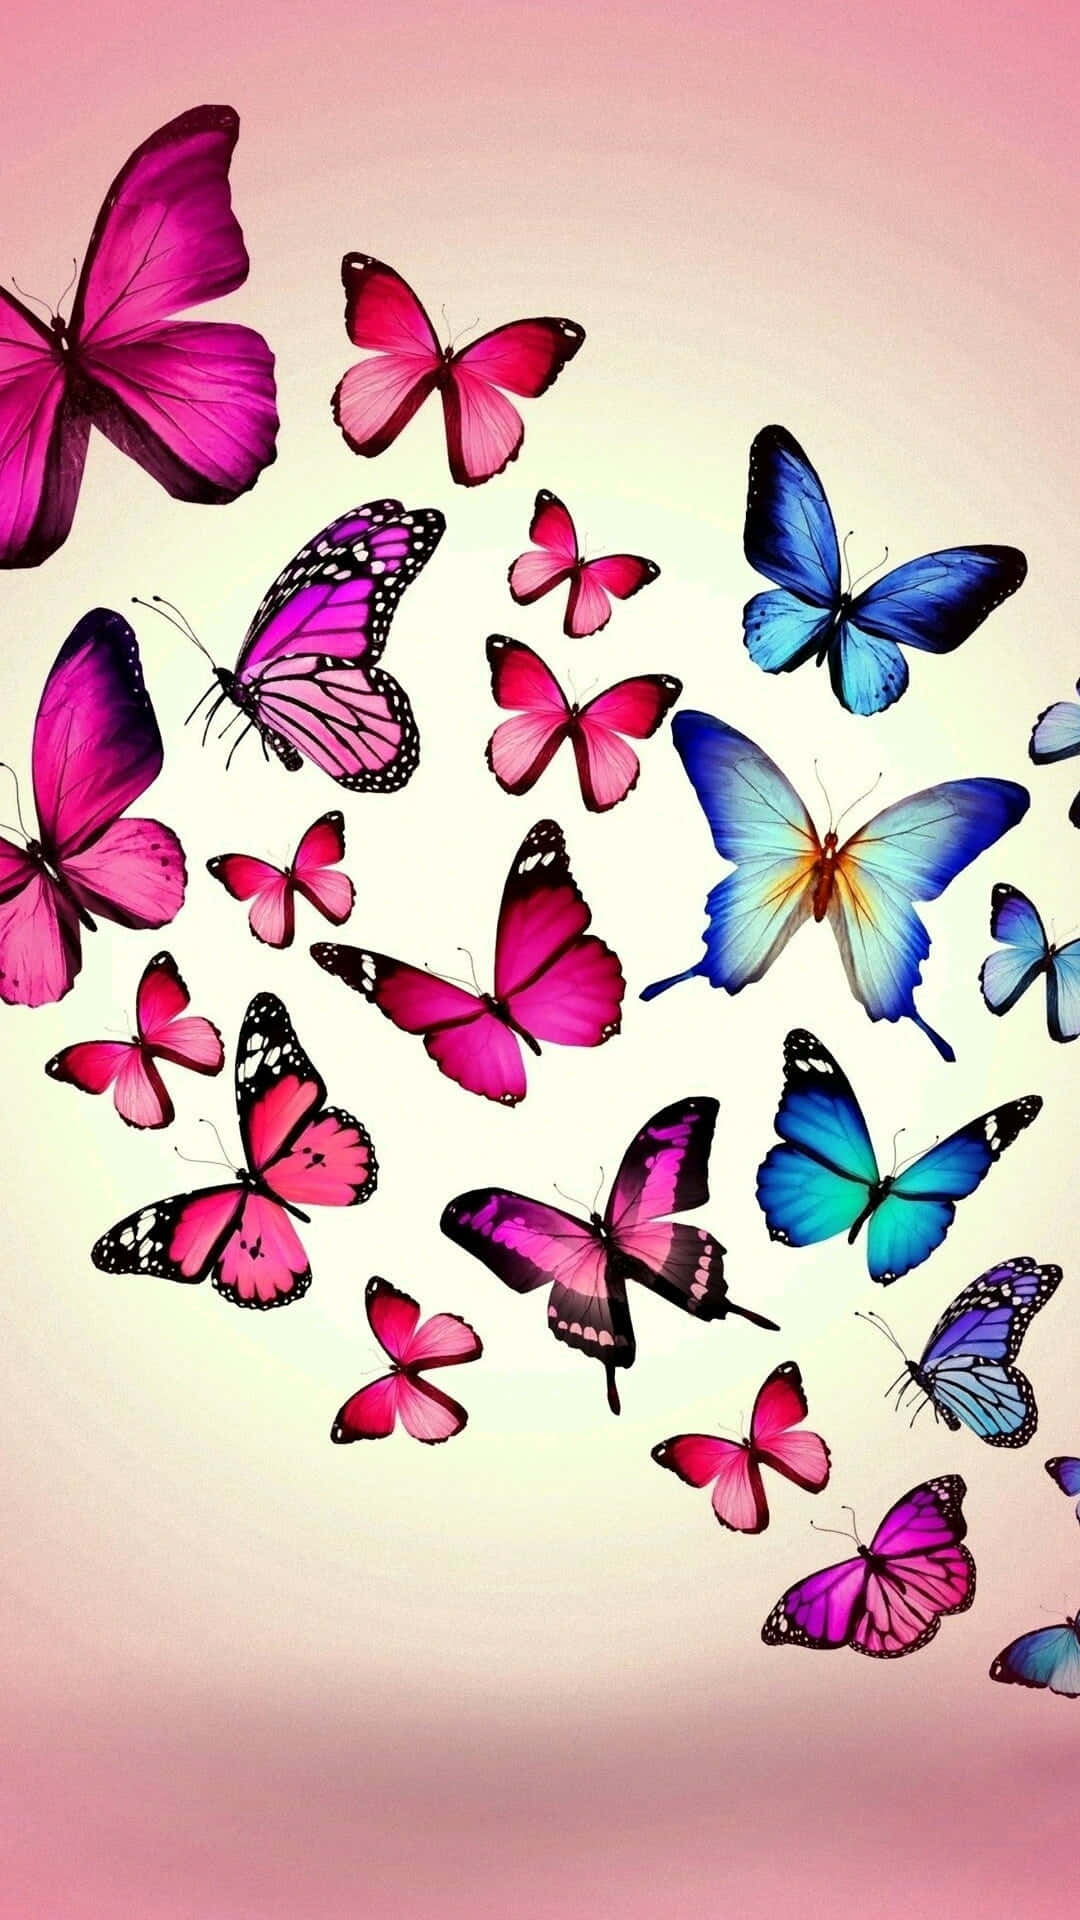 a group of butterflies flying in the air